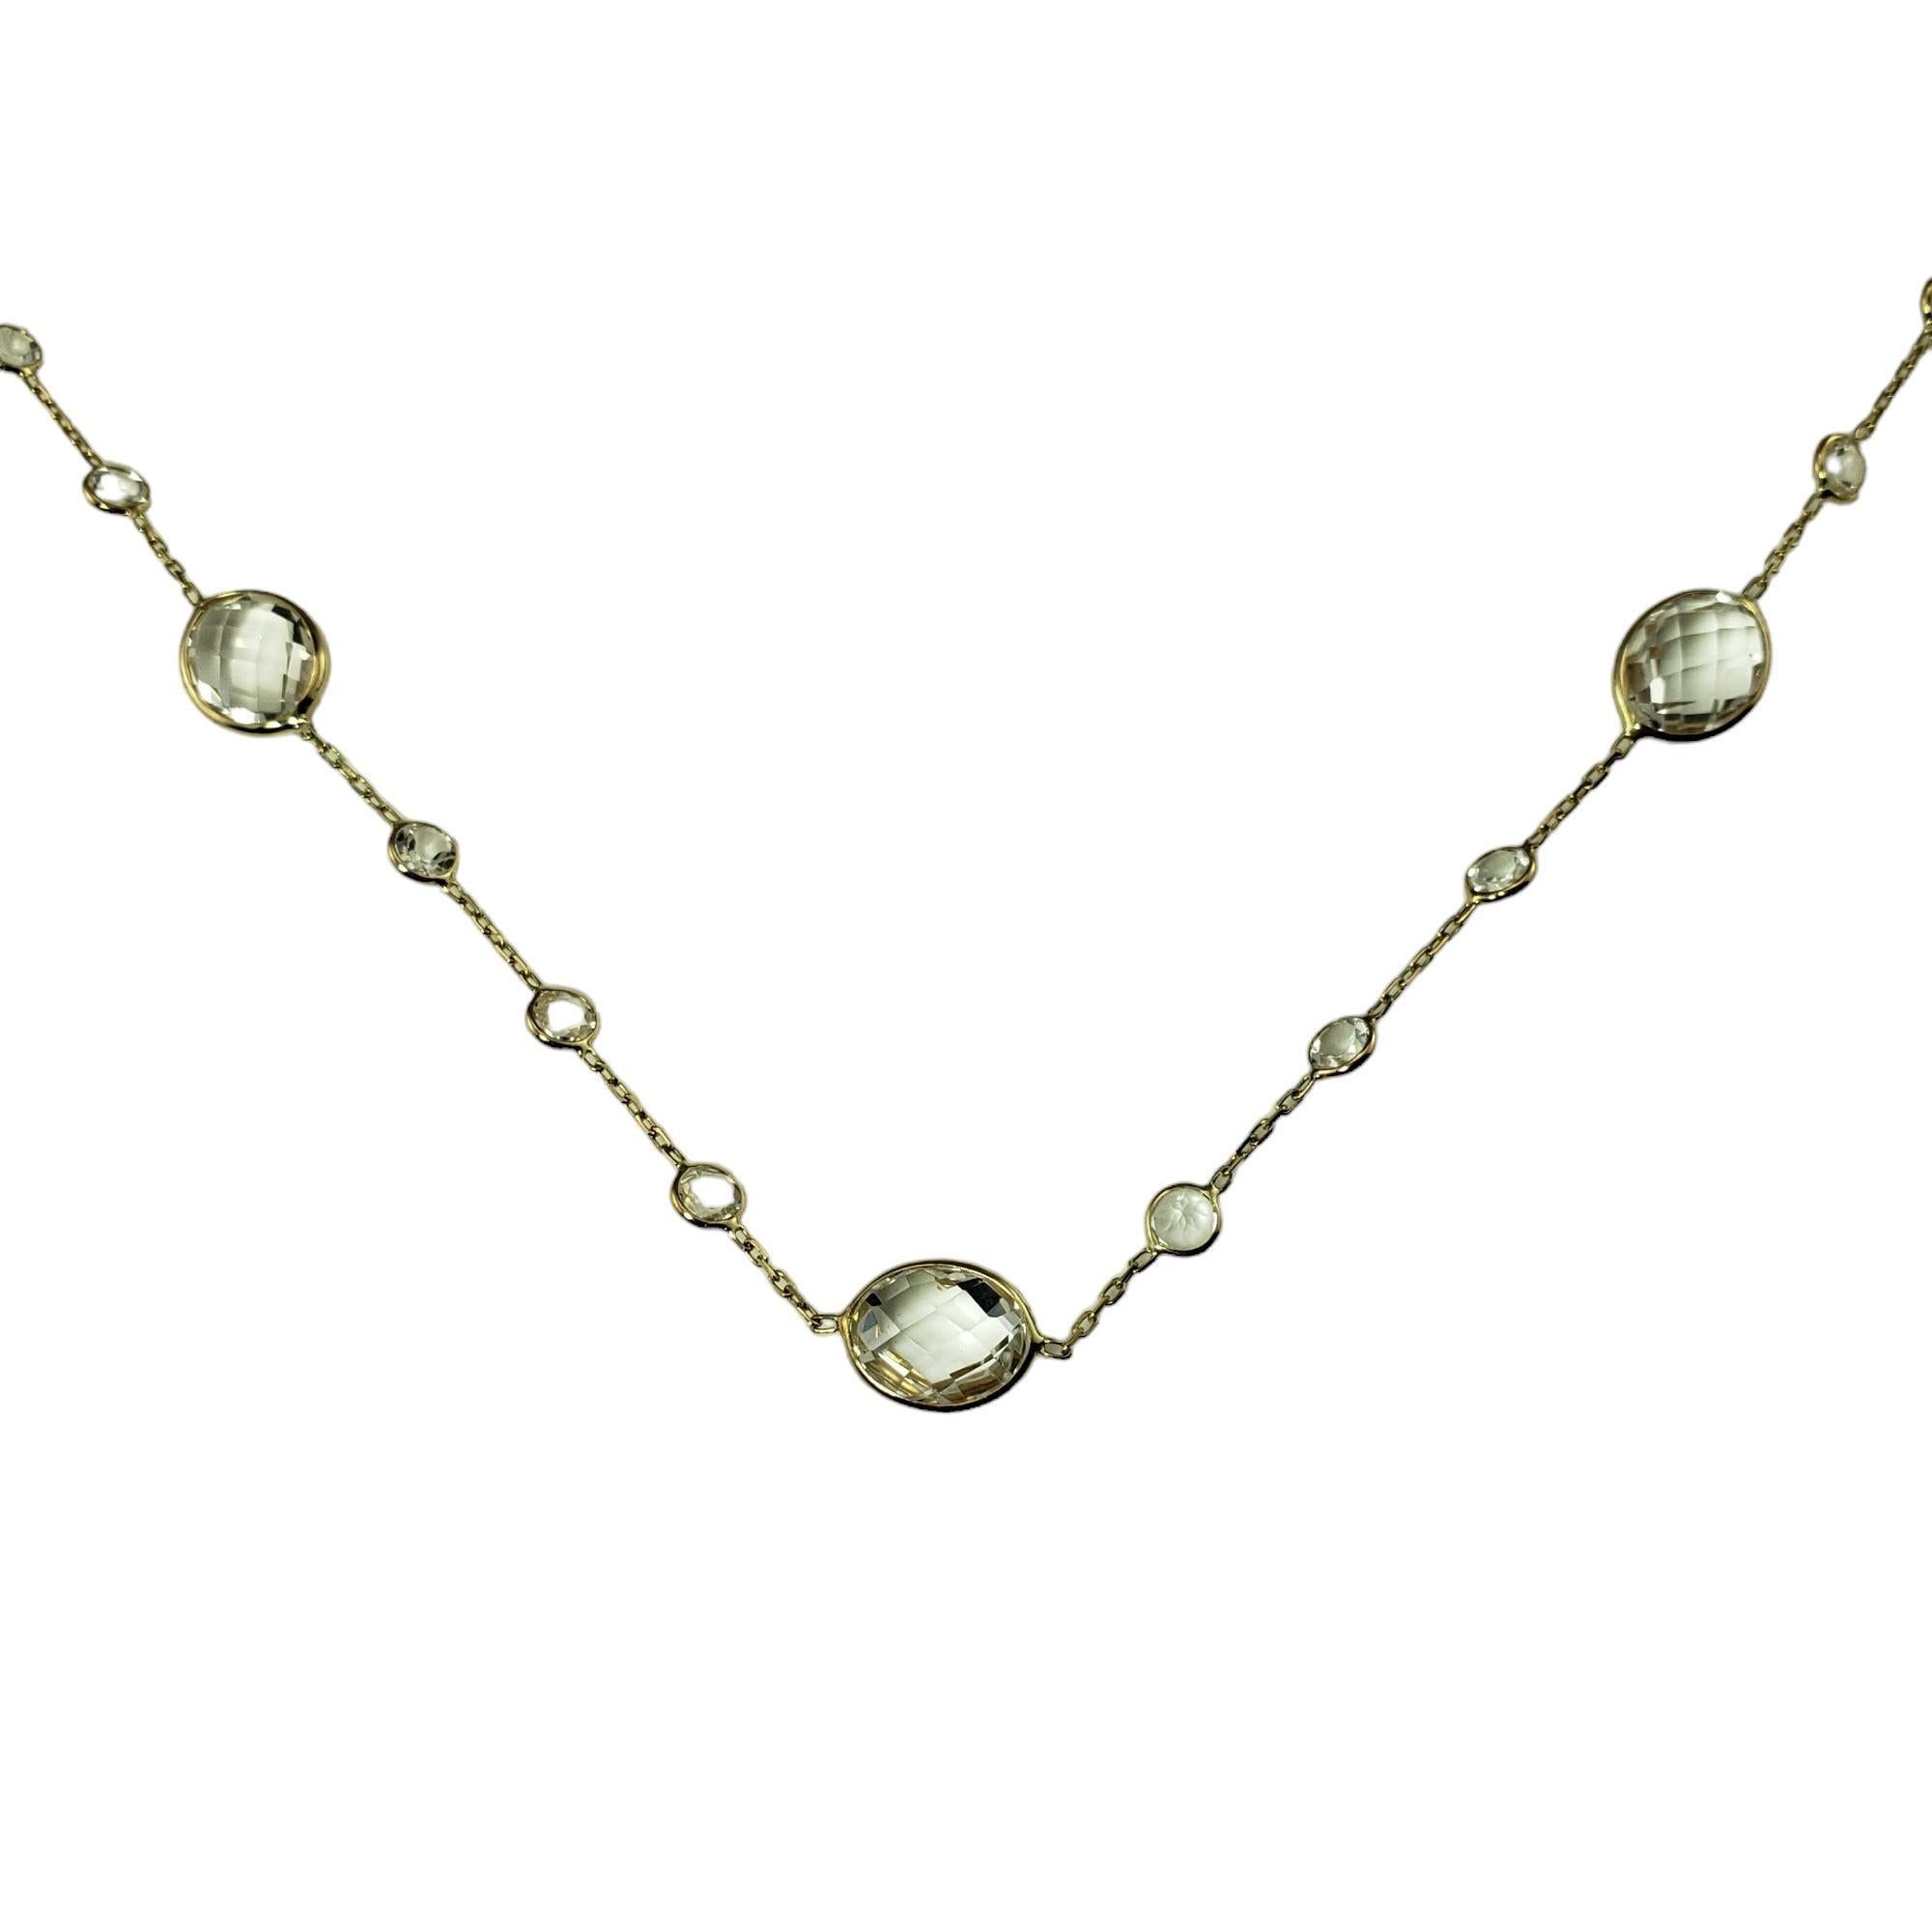 Vintage 14K Yellow Gold Topaz Necklace JAGi Certified-

This elegant necklace five oval cut white topaz and 16 round brilliant cut white topaz bezel set in 14K yellow gold.

Total topaz weight:  6.3 ct.

Size: 19.75 inches

Stamped: 14KT